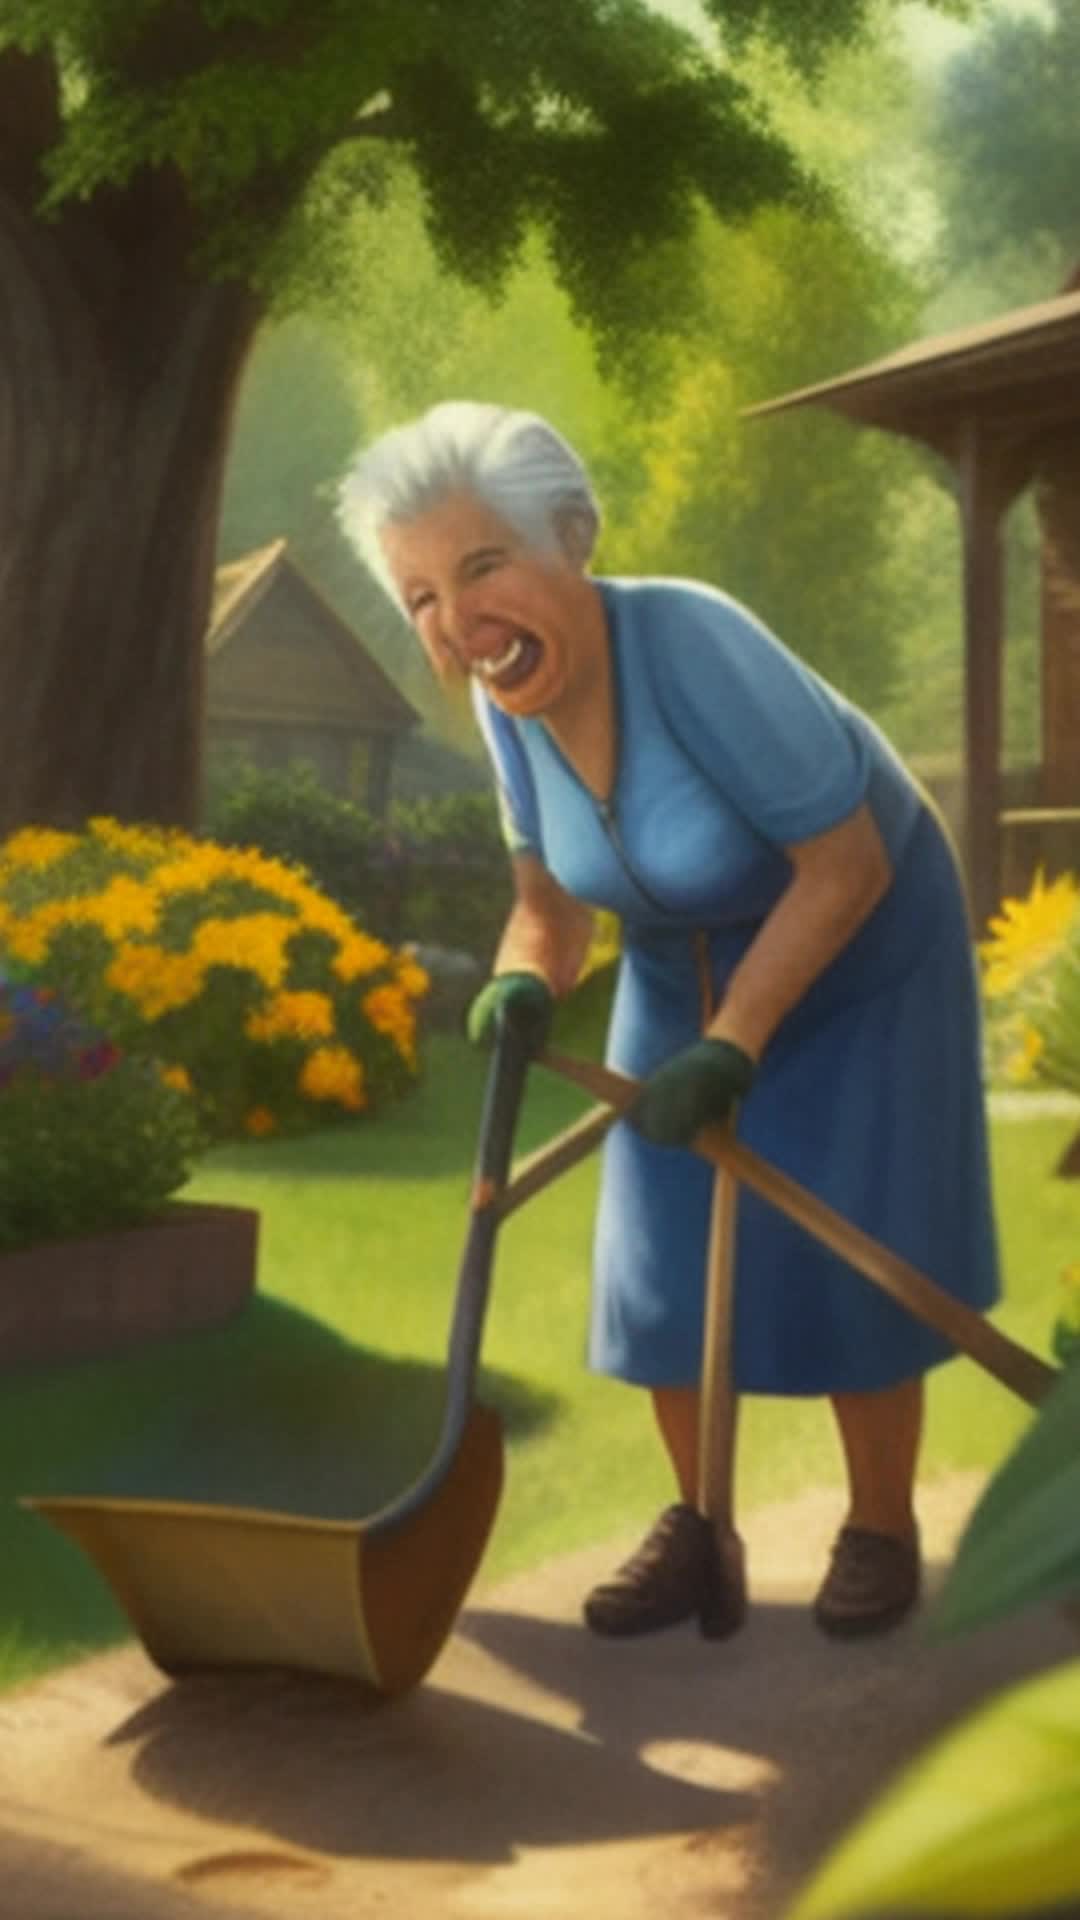 Elderly woman, Ana, shoveling dirt, laughing heartily, small boy describing pirate adventure, lush garden setting, detailed and sharp focus, soft afternoon light, shadows cast by surrounding flora